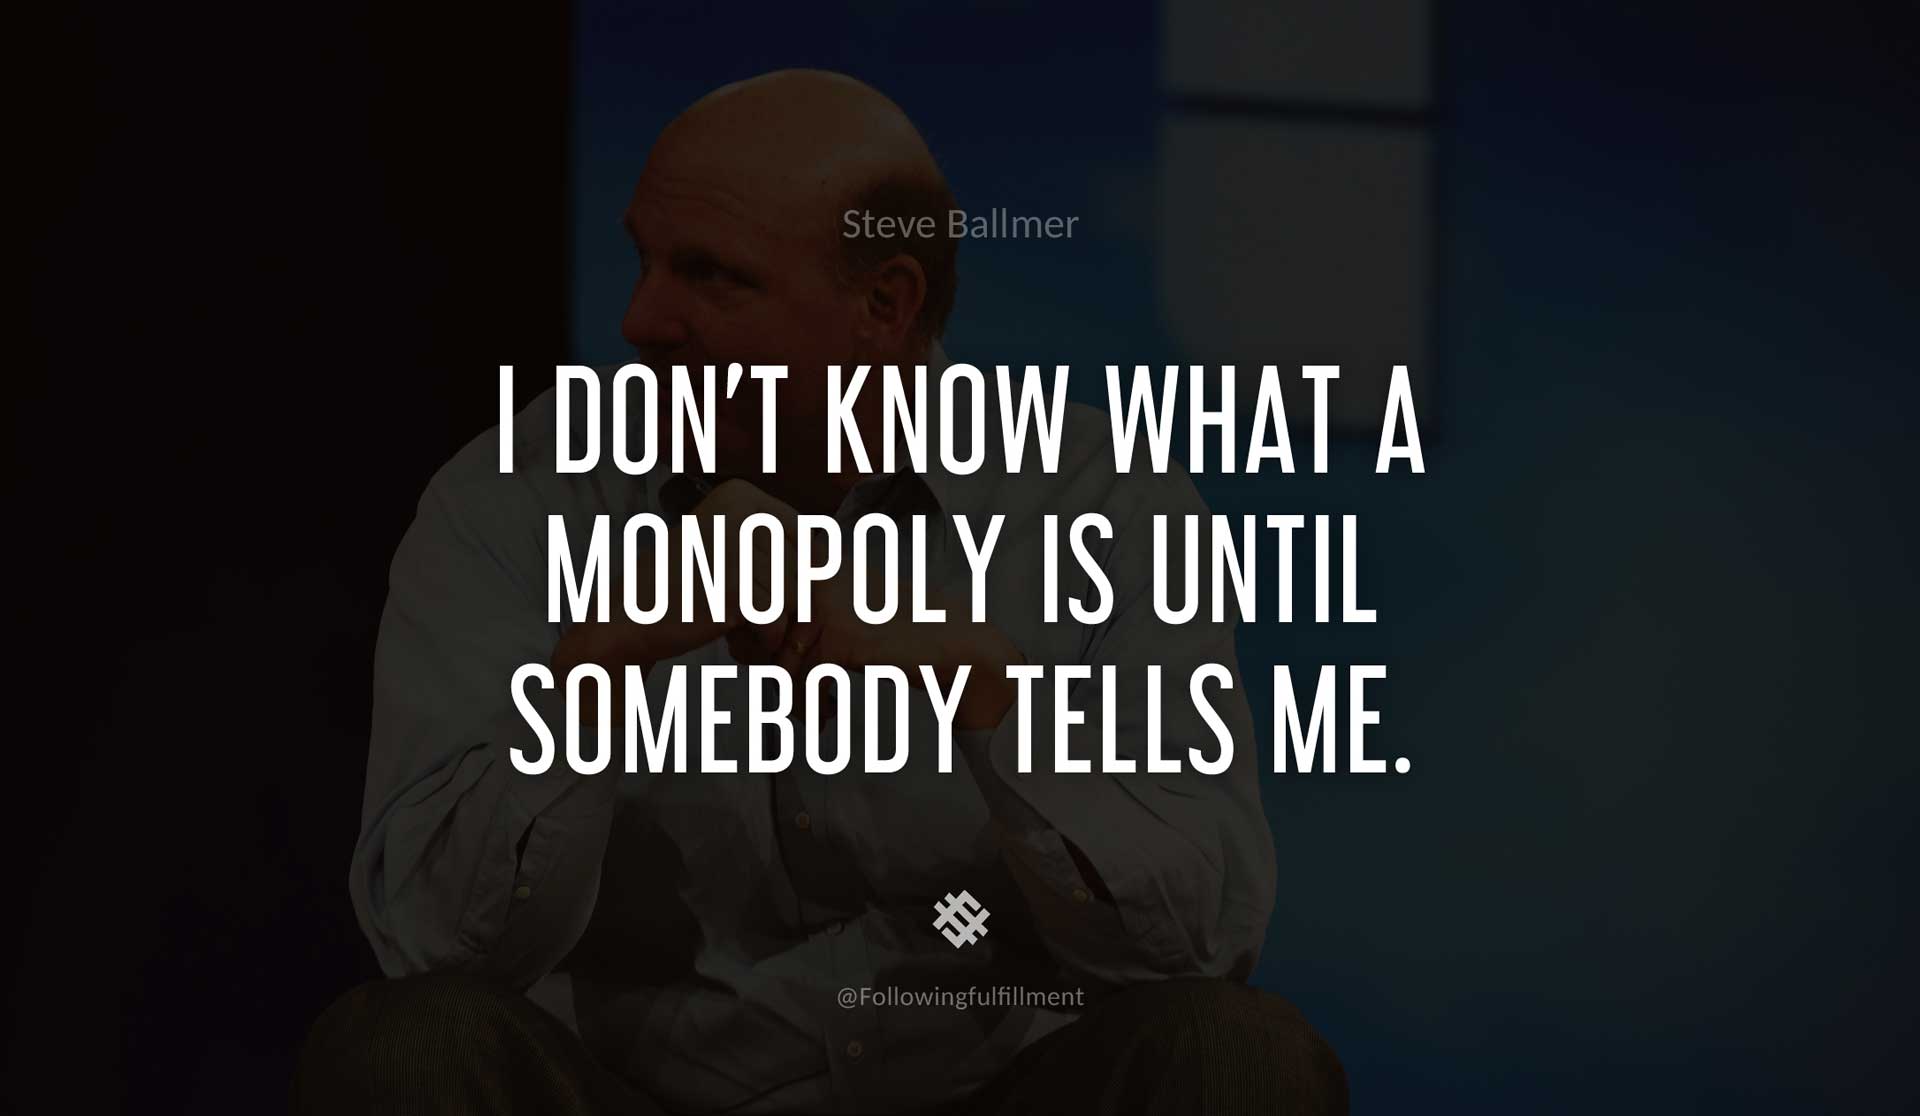 I-don't-know-what-a-monopoly-is-until-somebody-tells-me.-STEVE-BALLMER-Quote.jpg